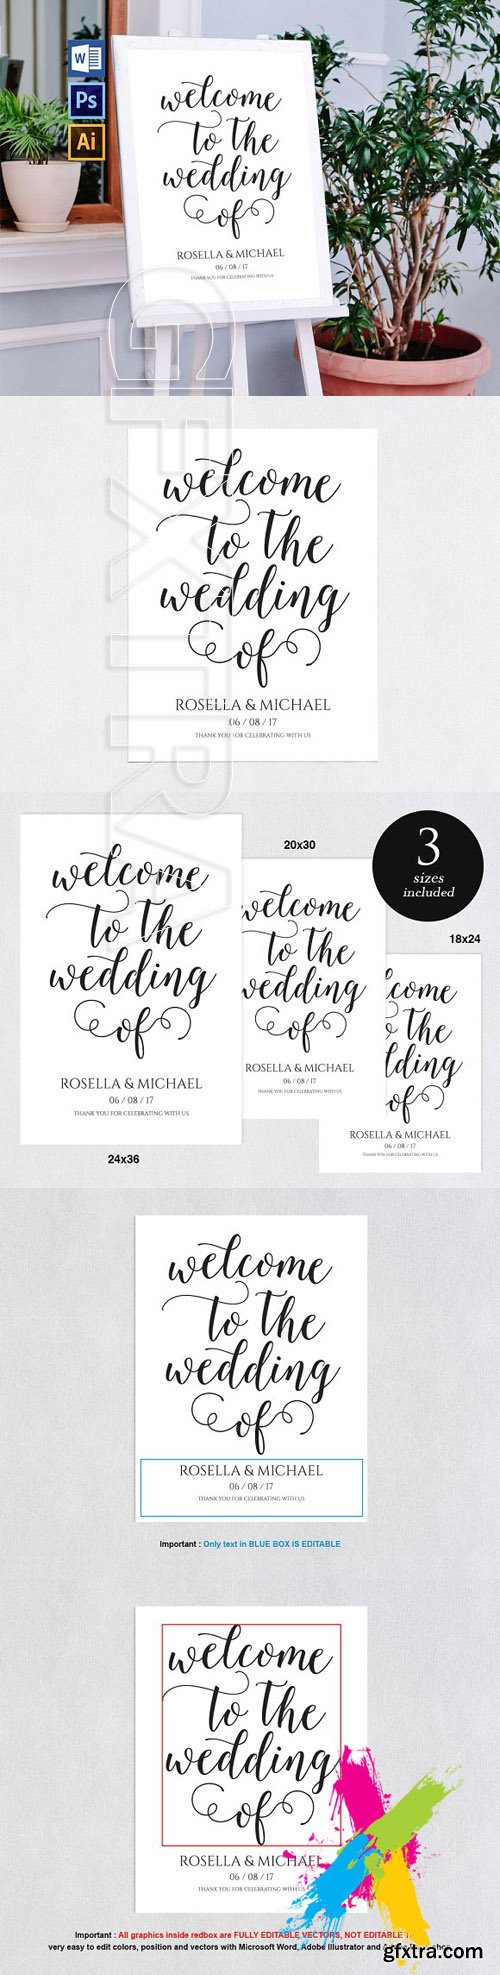 CM - Wedding welcome sign WPC202 1693616